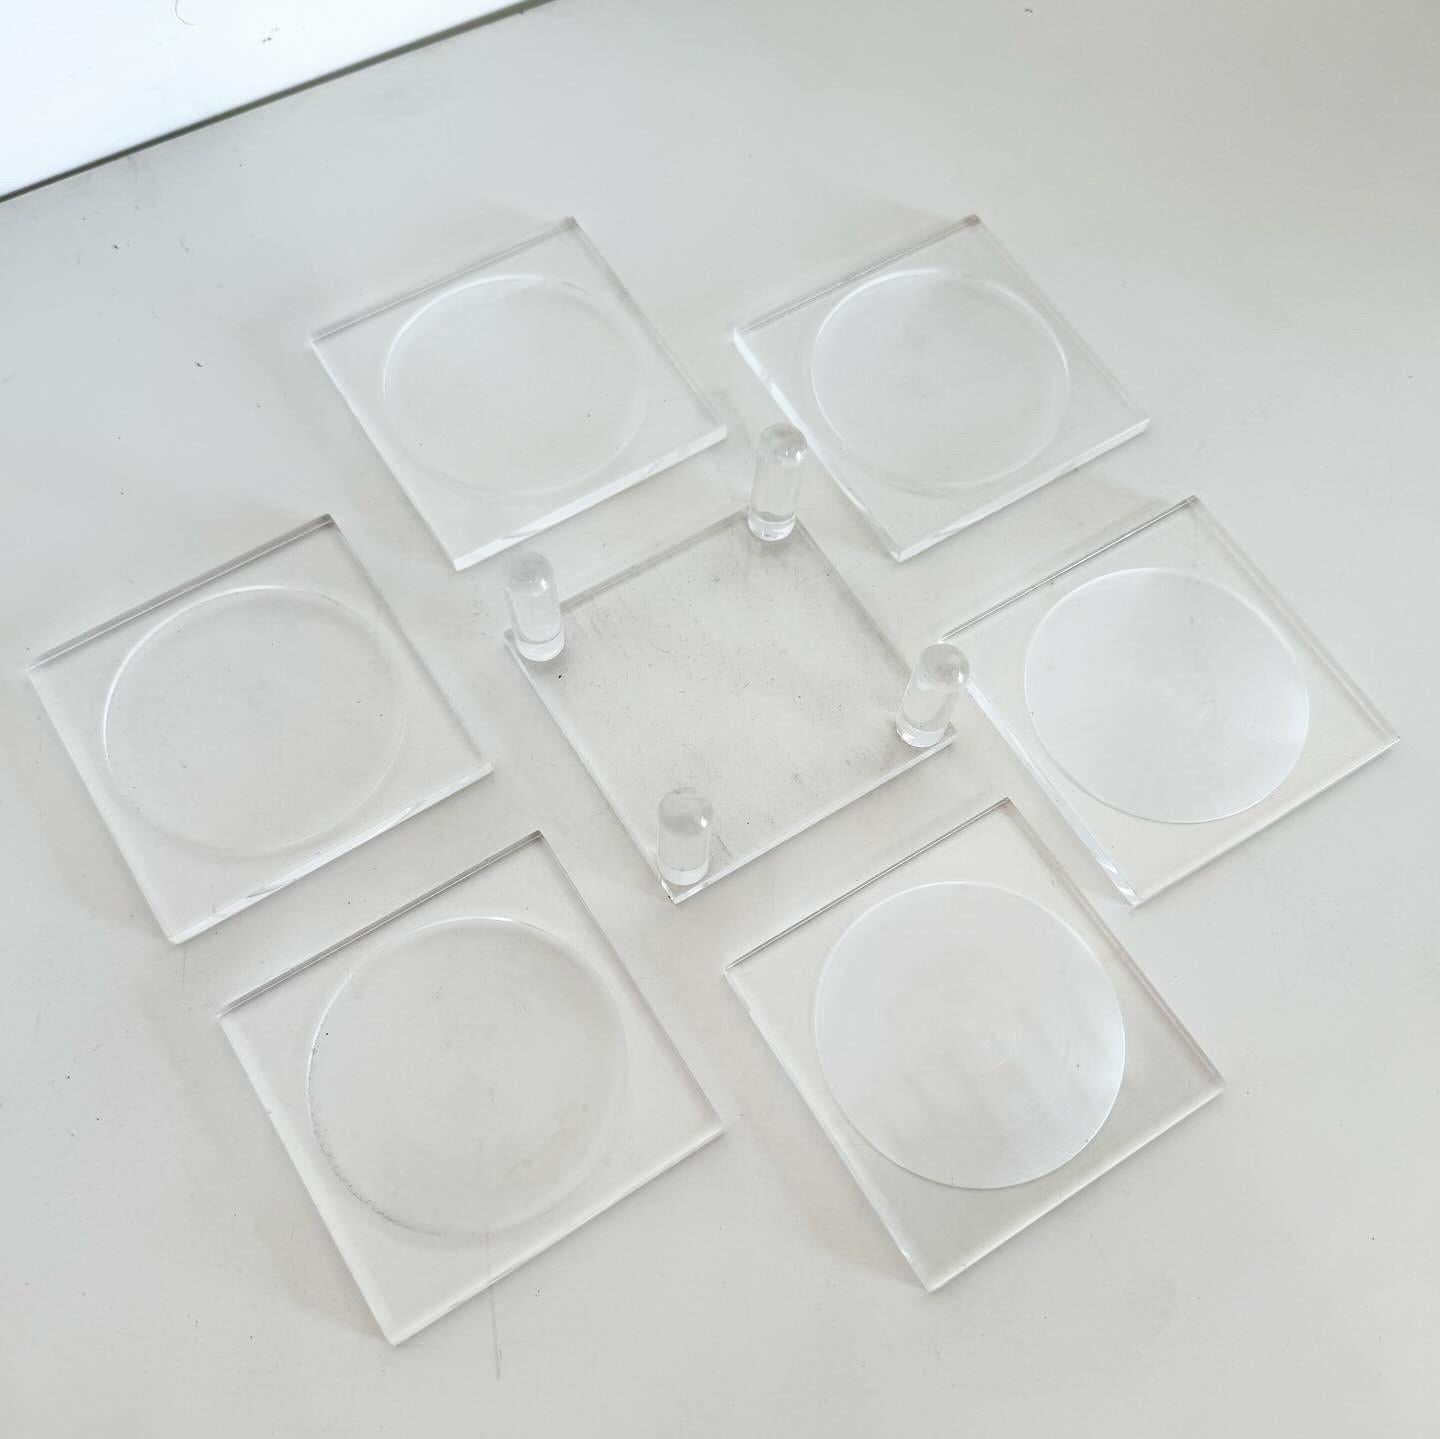 Discover the minimalist elegance of a Postmodern Lucite Coaster Set with Holder, featuring 6 sleek coasters perfect for contemporary homes. These durable, clear Lucite coasters blend sophistication with functionality, offering a stylish solution to